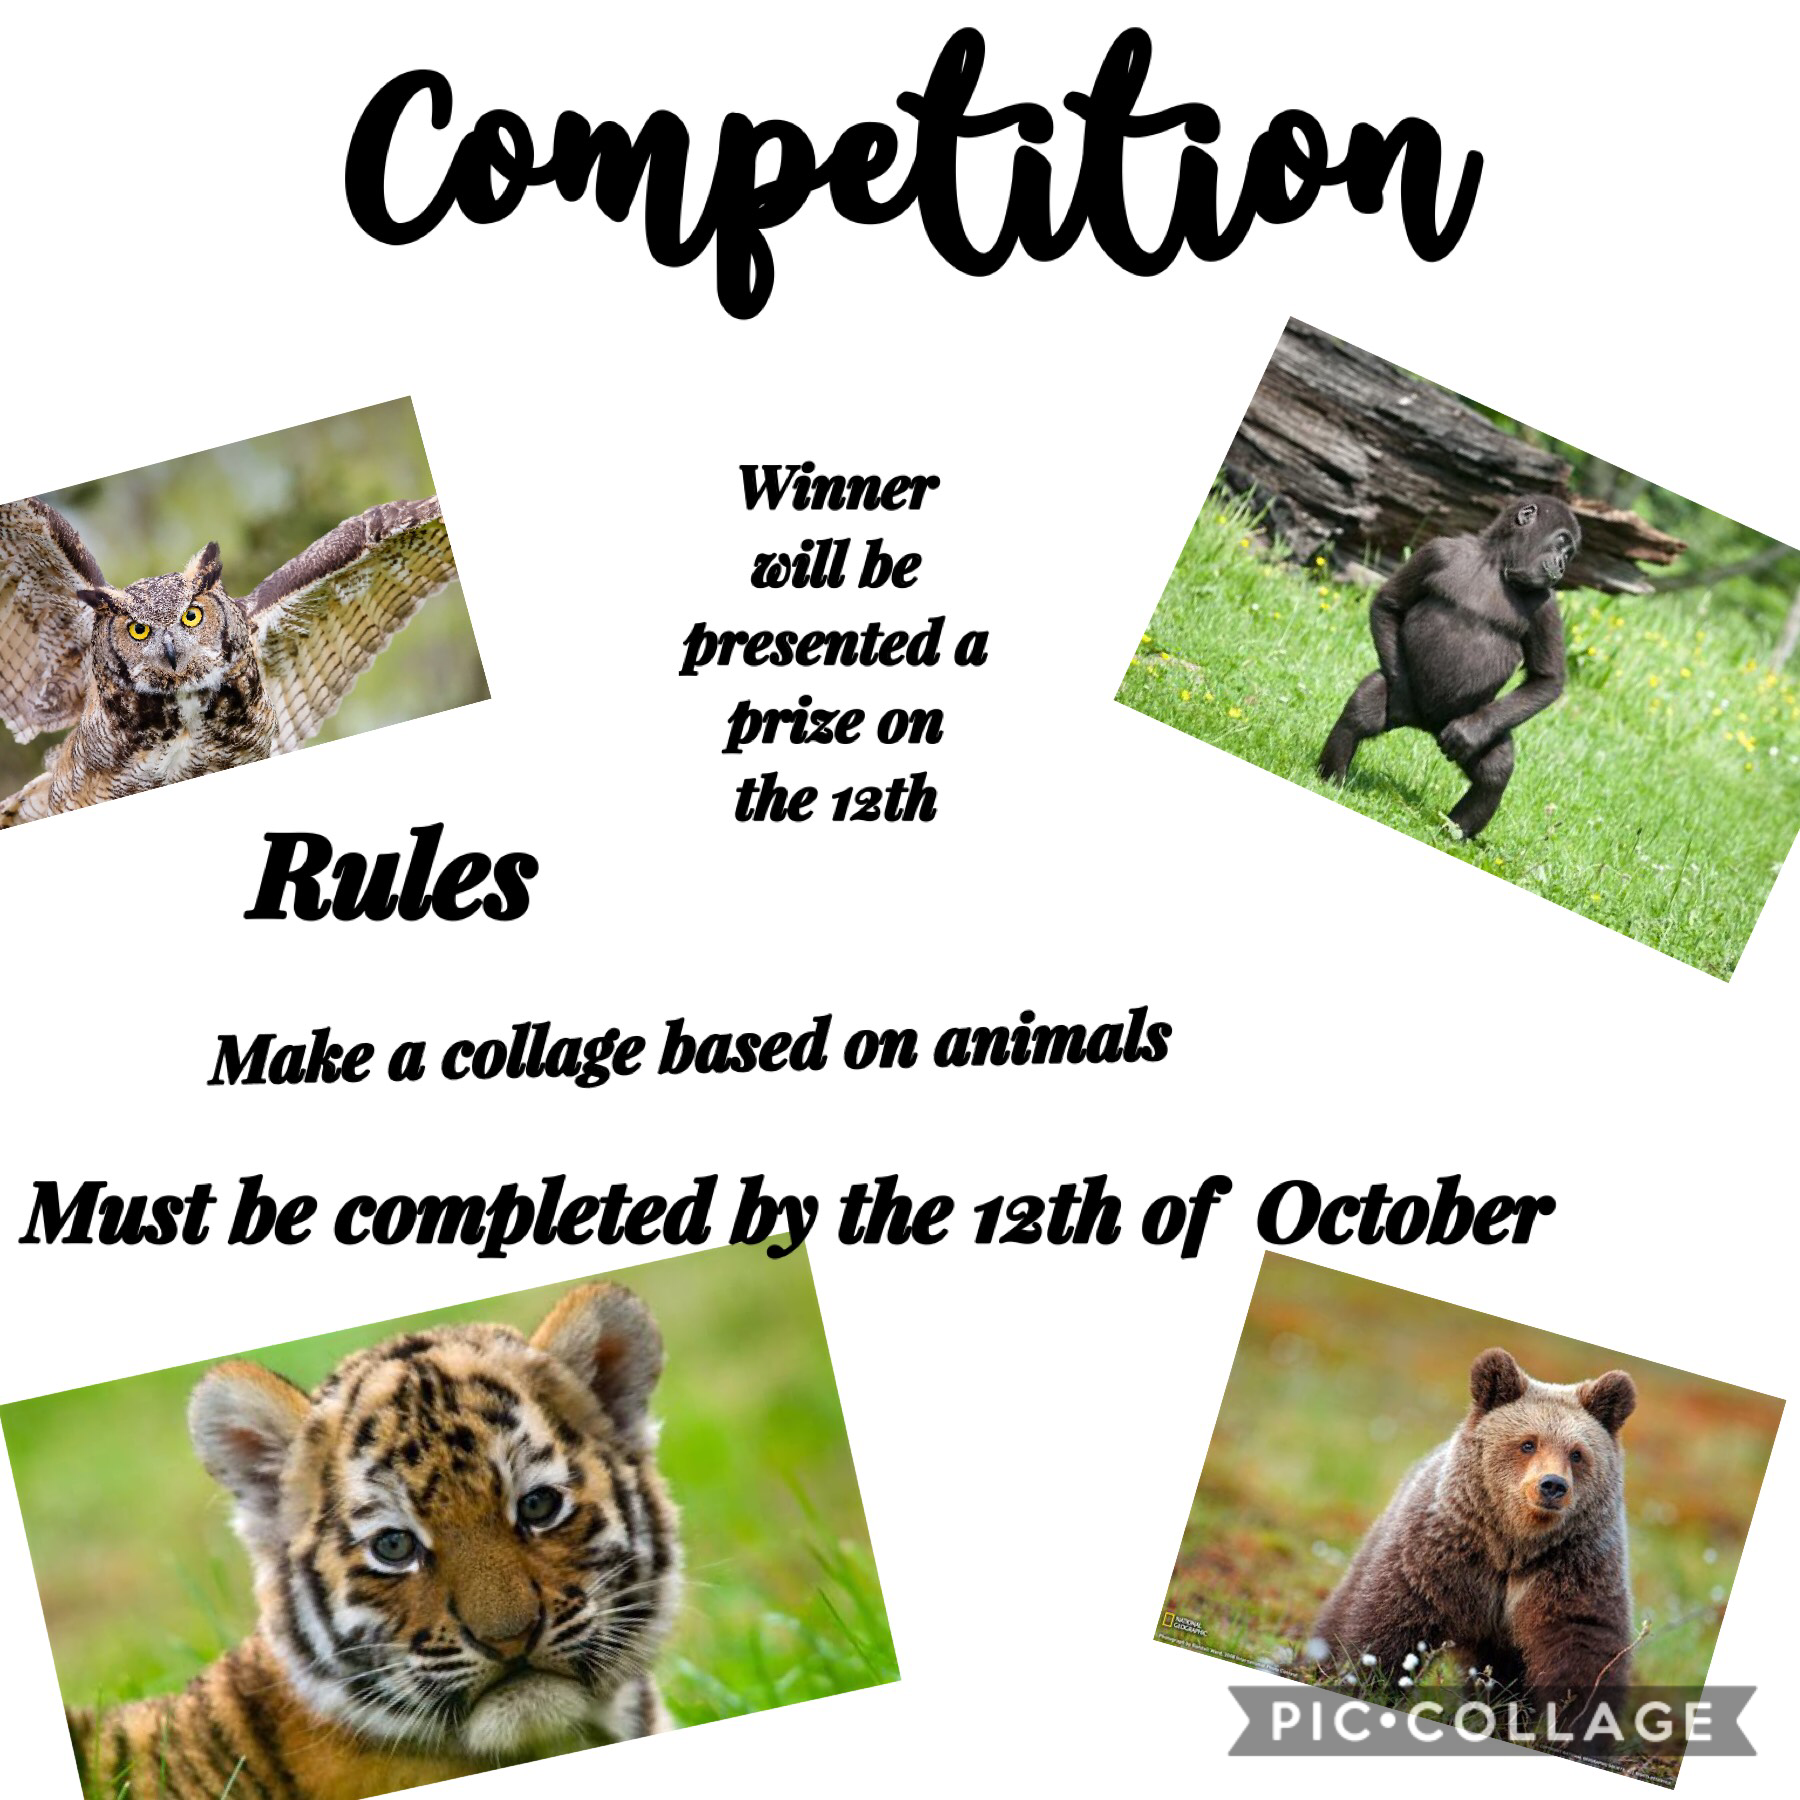 #PicCollage #animals #prize #competition #shoutout